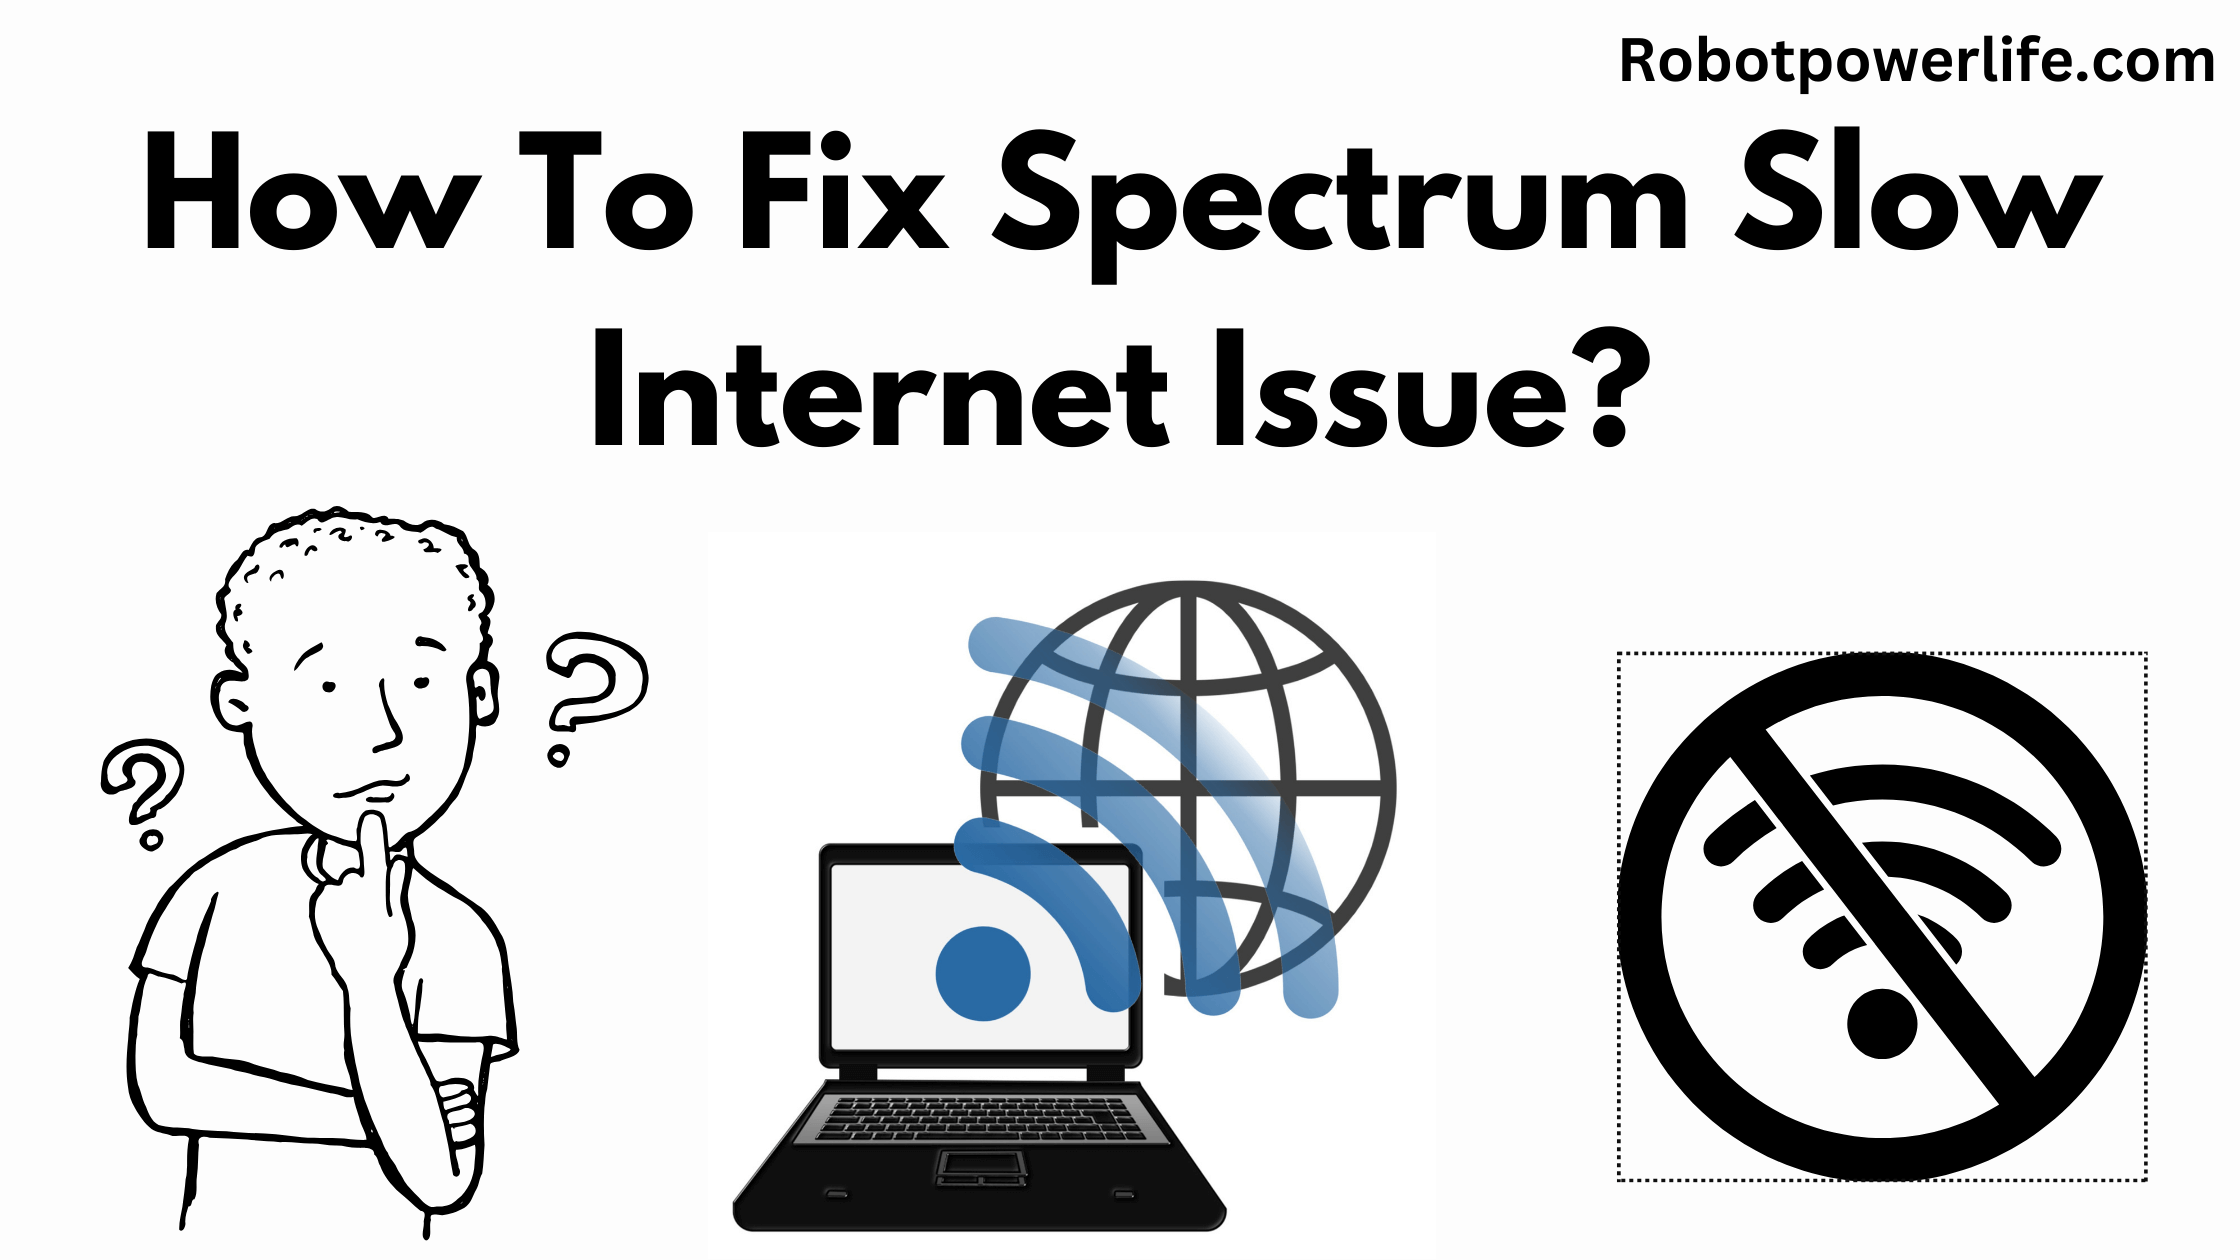 How To Fix Spectrum Slow Internet Issue